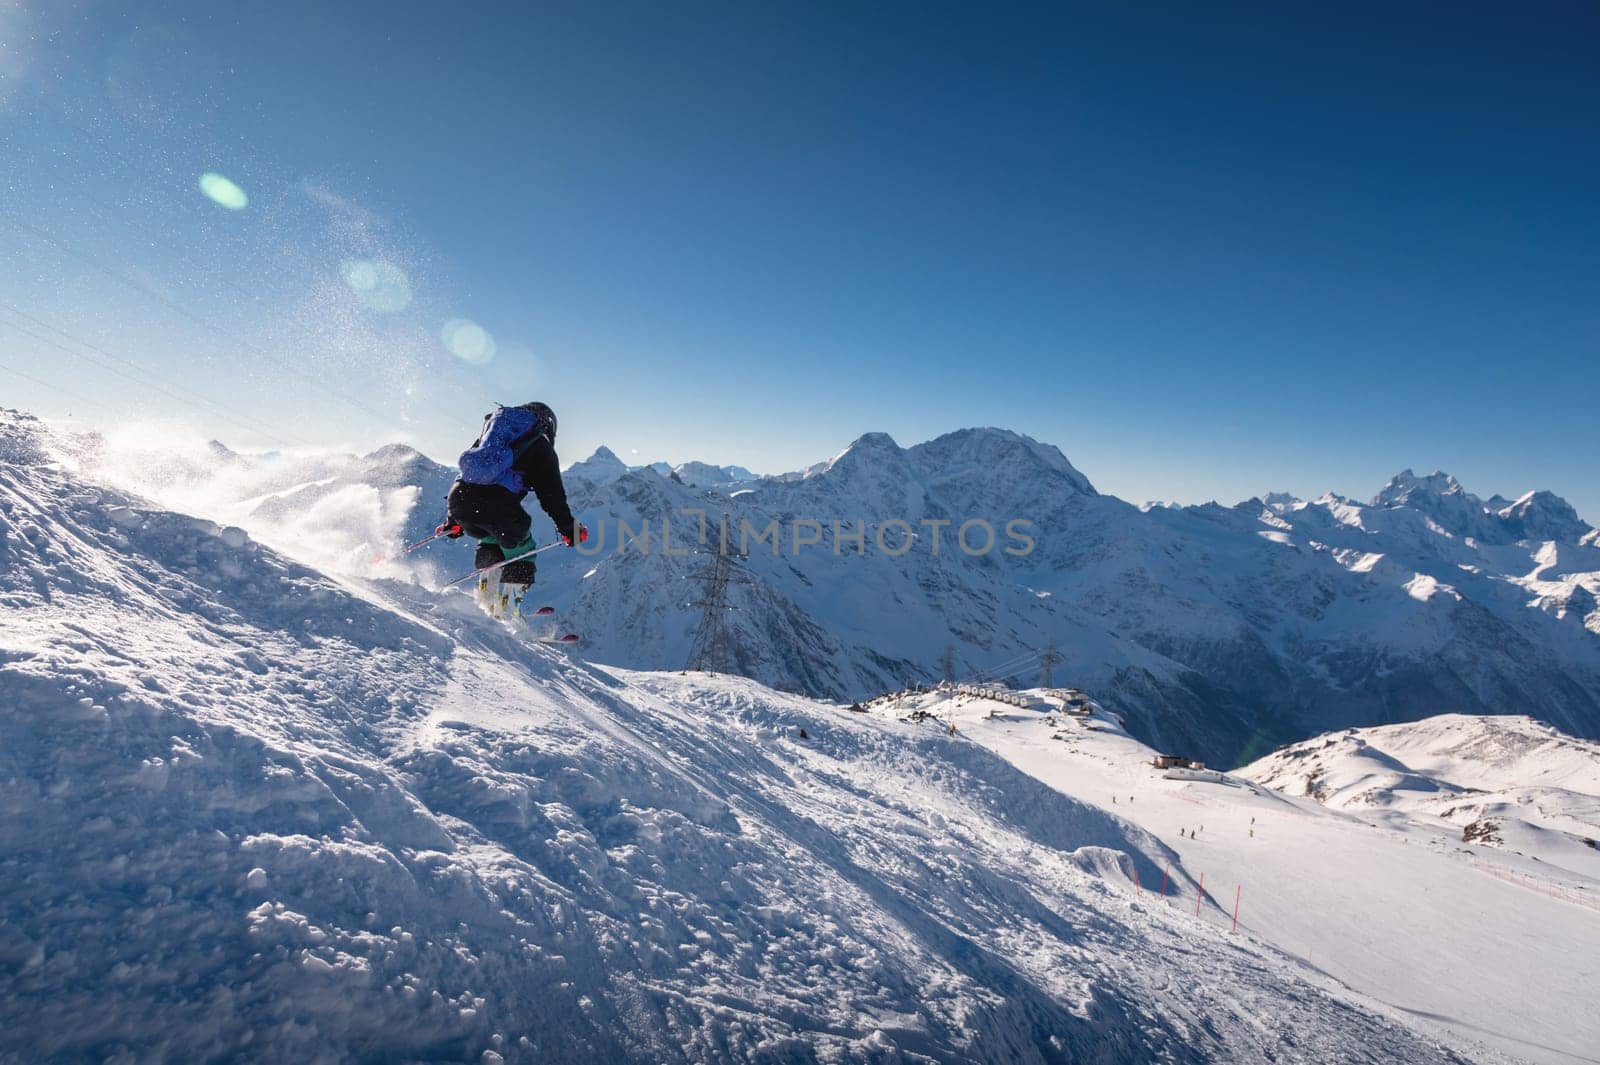 good skiing in snowy mountains. a nice winter day, an incredible ski drive from which a female skier jumps against the backdrop of a snowy sunny day by yanik88